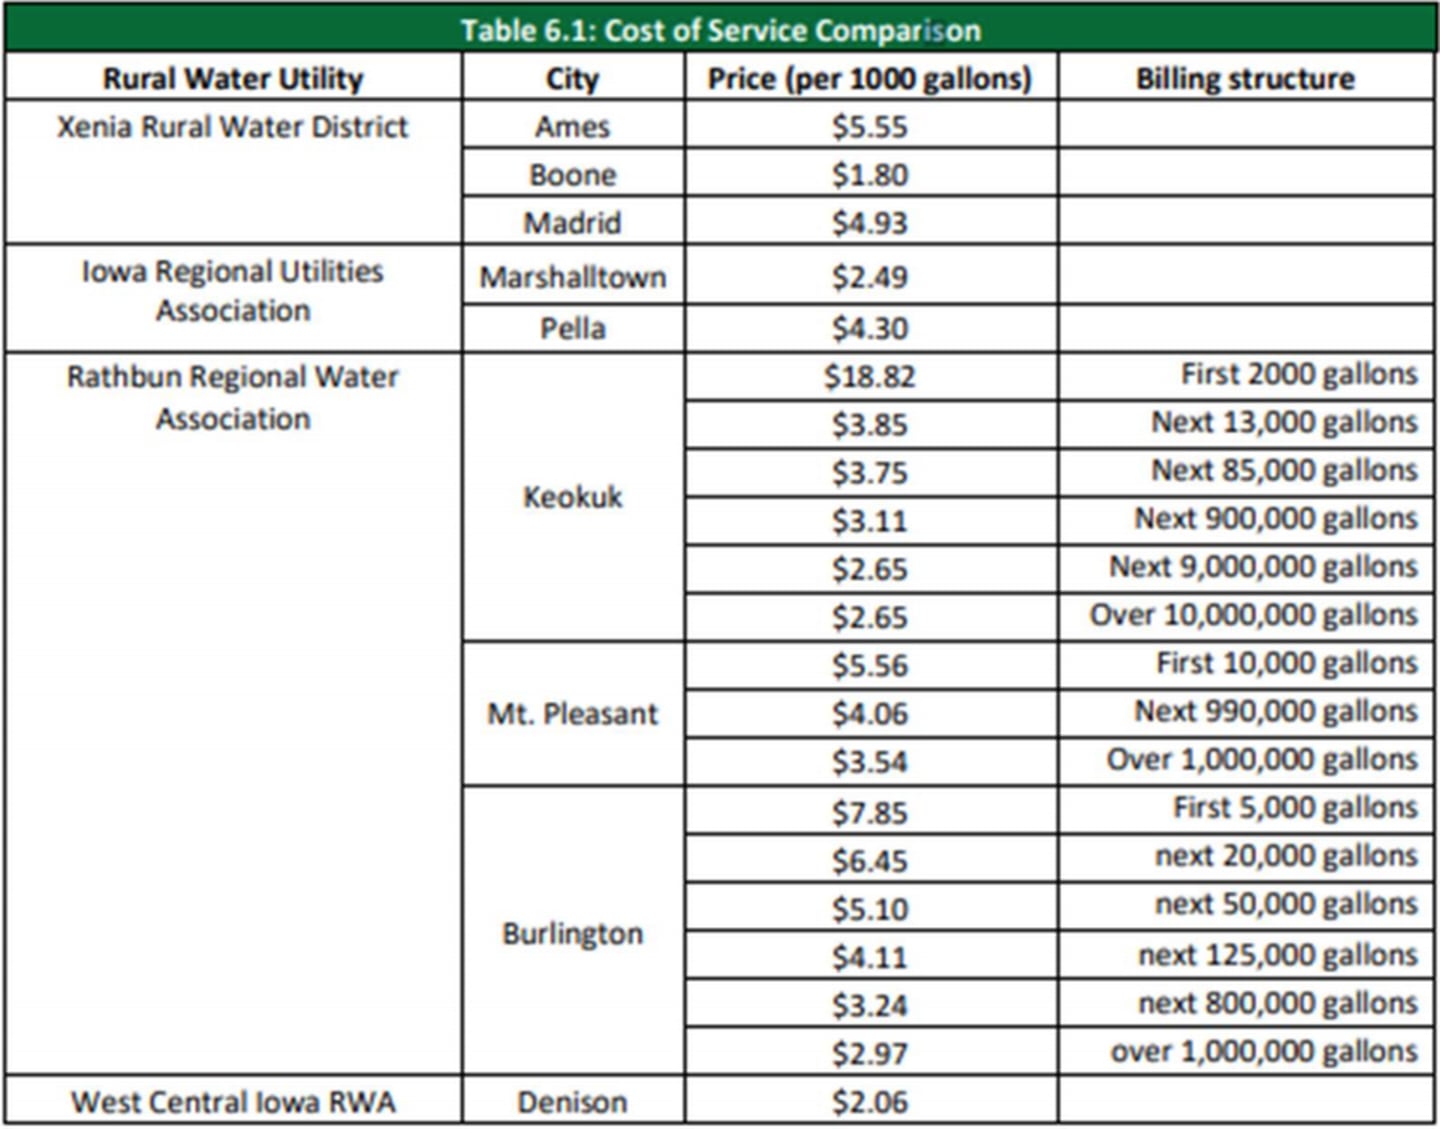 Table 6.1 shows the cost of service comparison for commuities providing water to rural water utilities such as Iowa Regional Utilities Association.